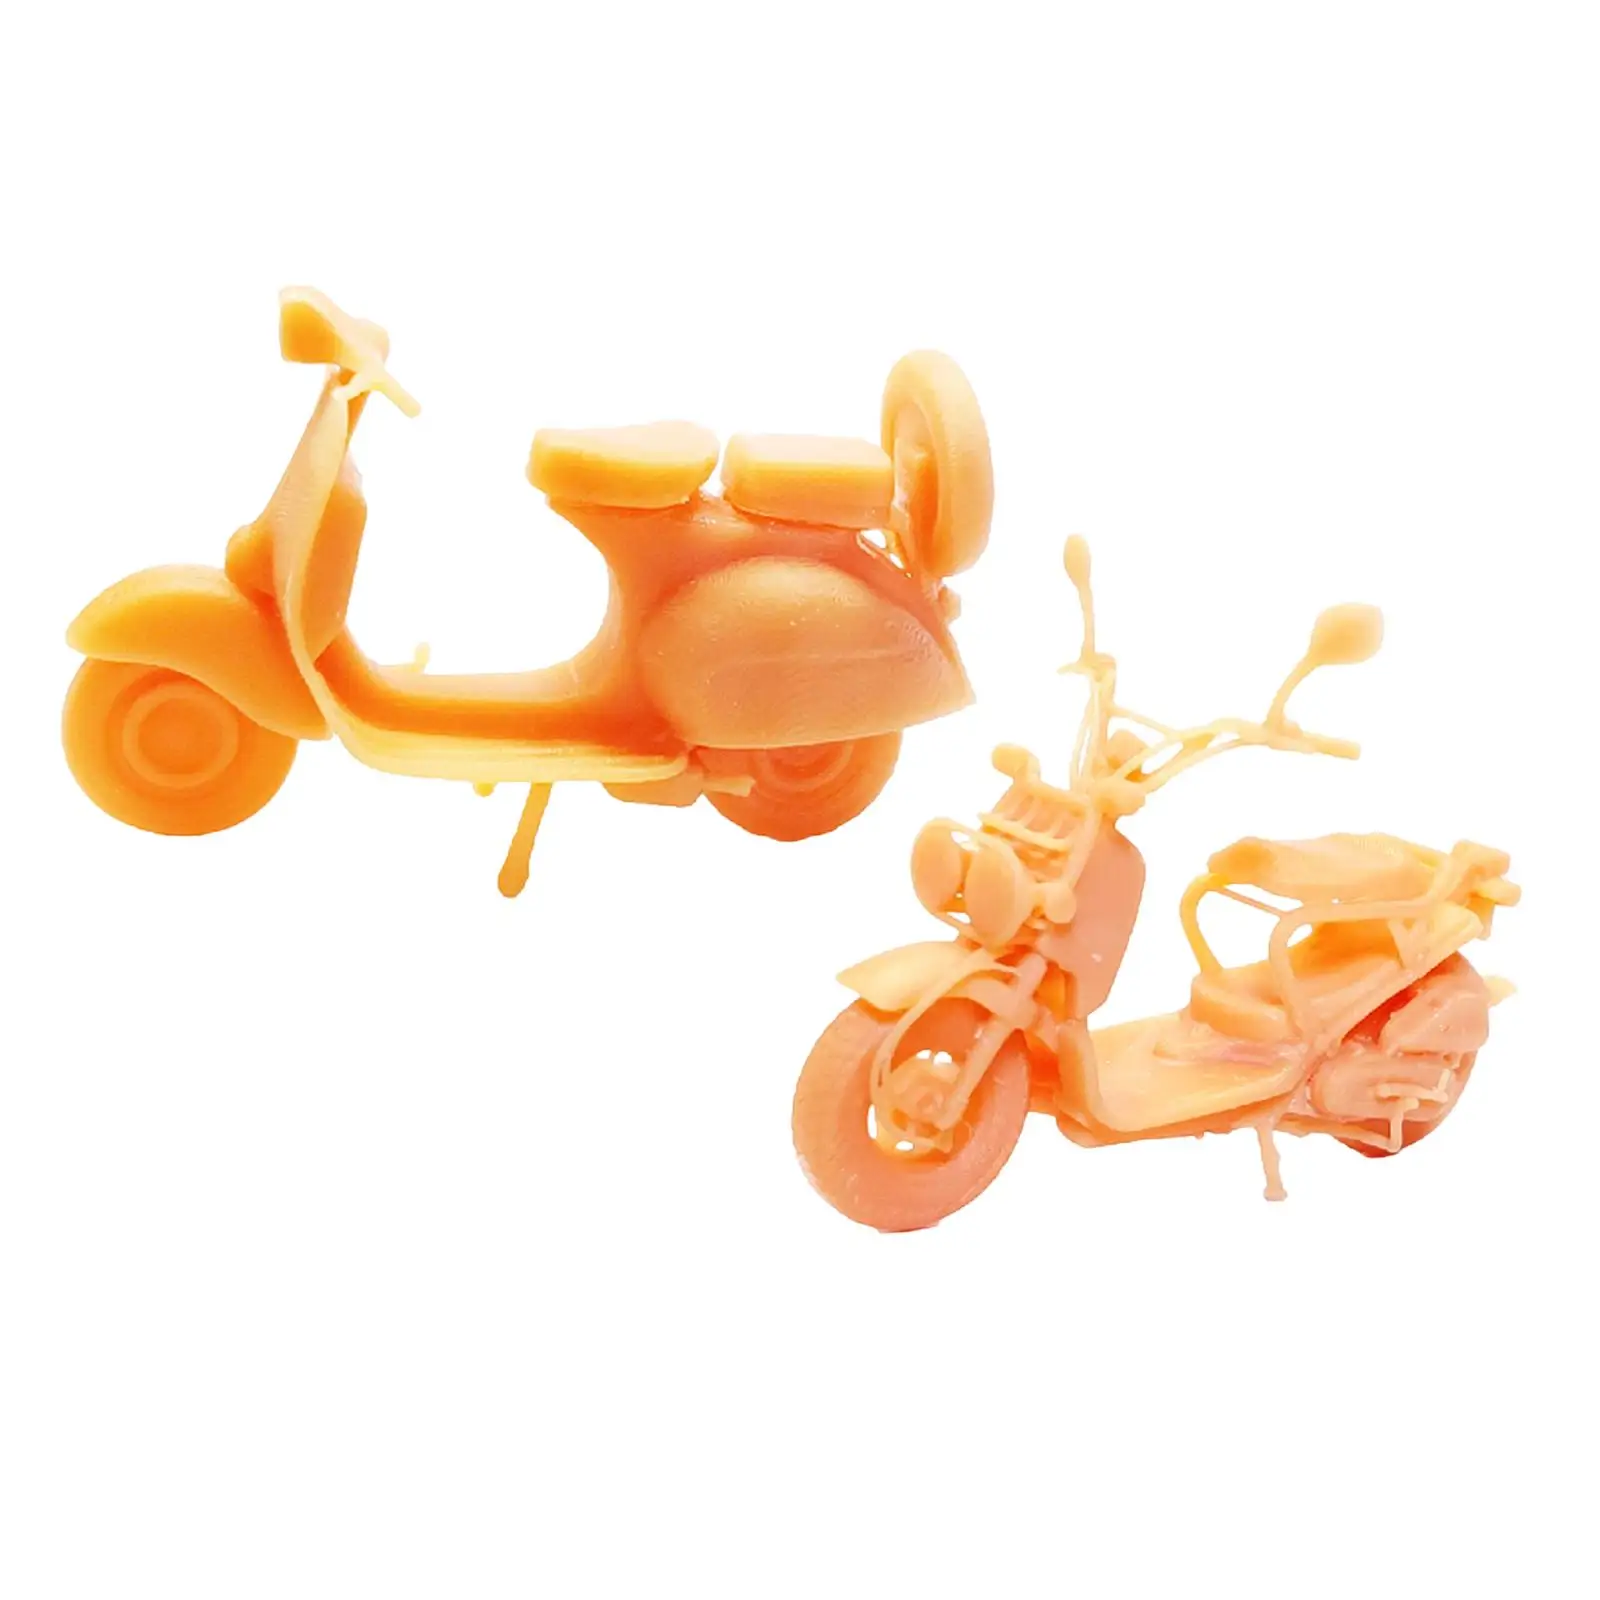 1:64 Diorama Street Motorcycle Model Collectibles Simulation Unpainted for Dollhouse Micro Landscapes Diorama Decor Accessories